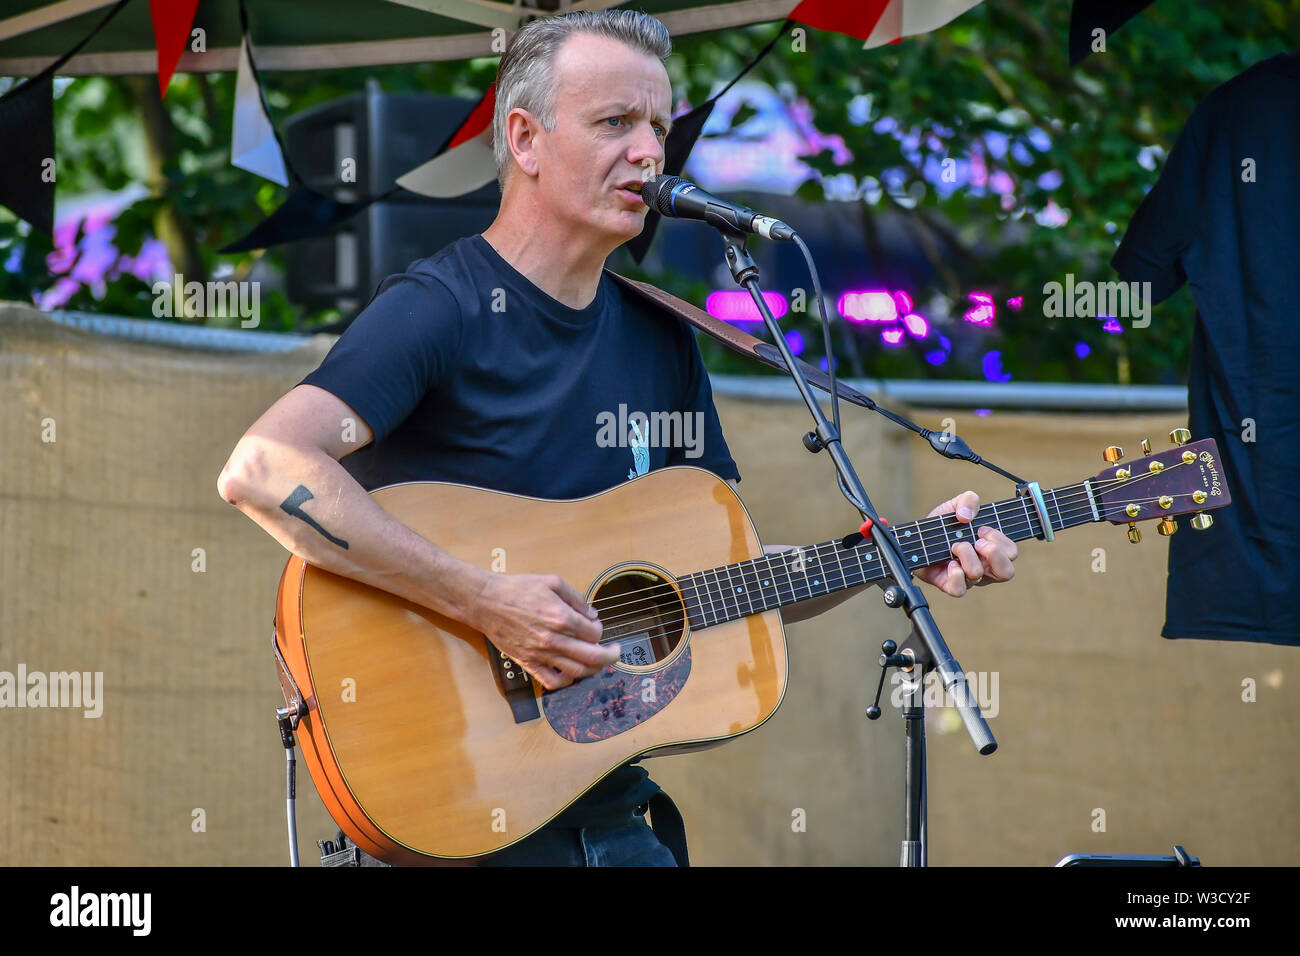 London, UK. 14th July 2019. Jamies Freeman performs at the Food Village at Kew the Music 2019 on 14 July 2019, London, UK. Credit: Picture Capital/Alamy Live News Stock Photo